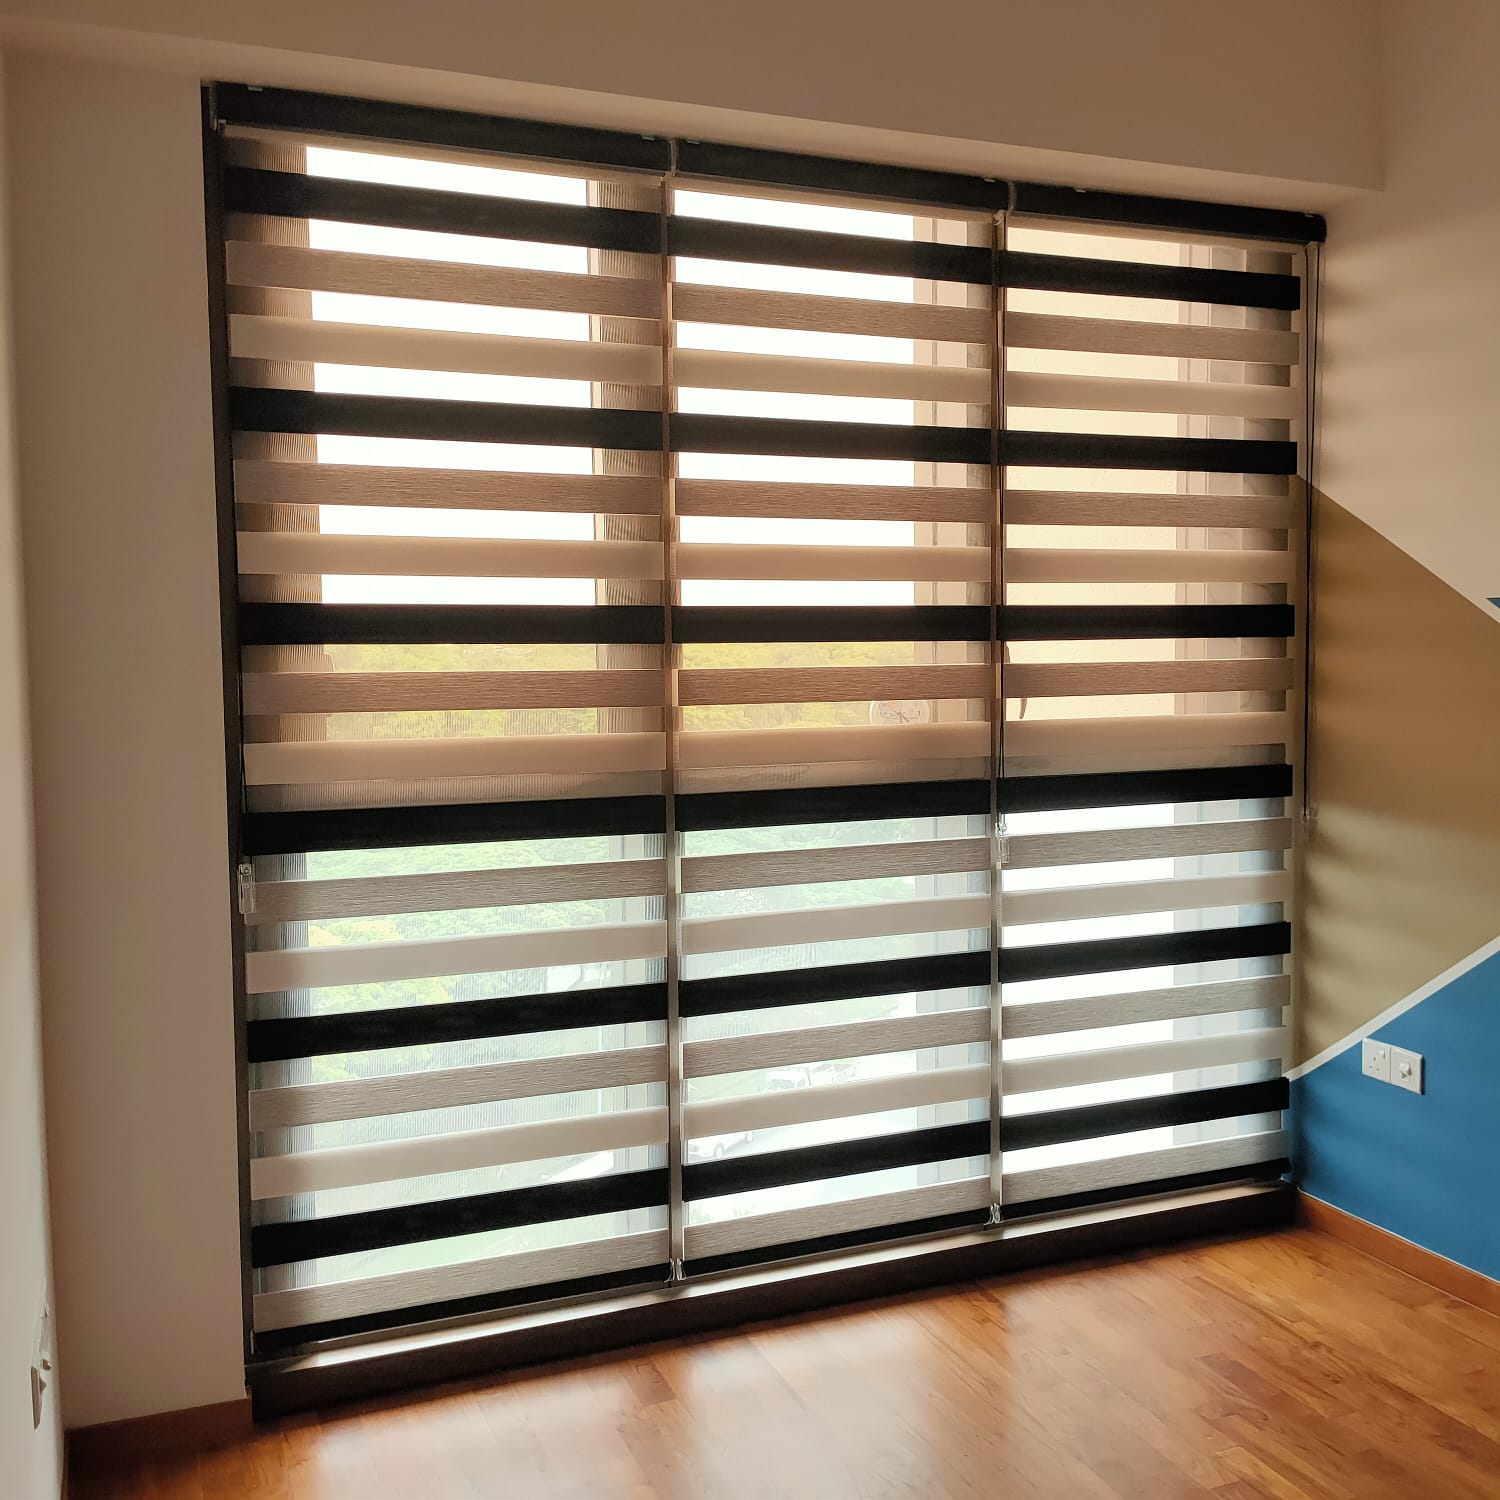 This is a Picture of Dimmer Korean combi Blinds at Singapore condo Seaside